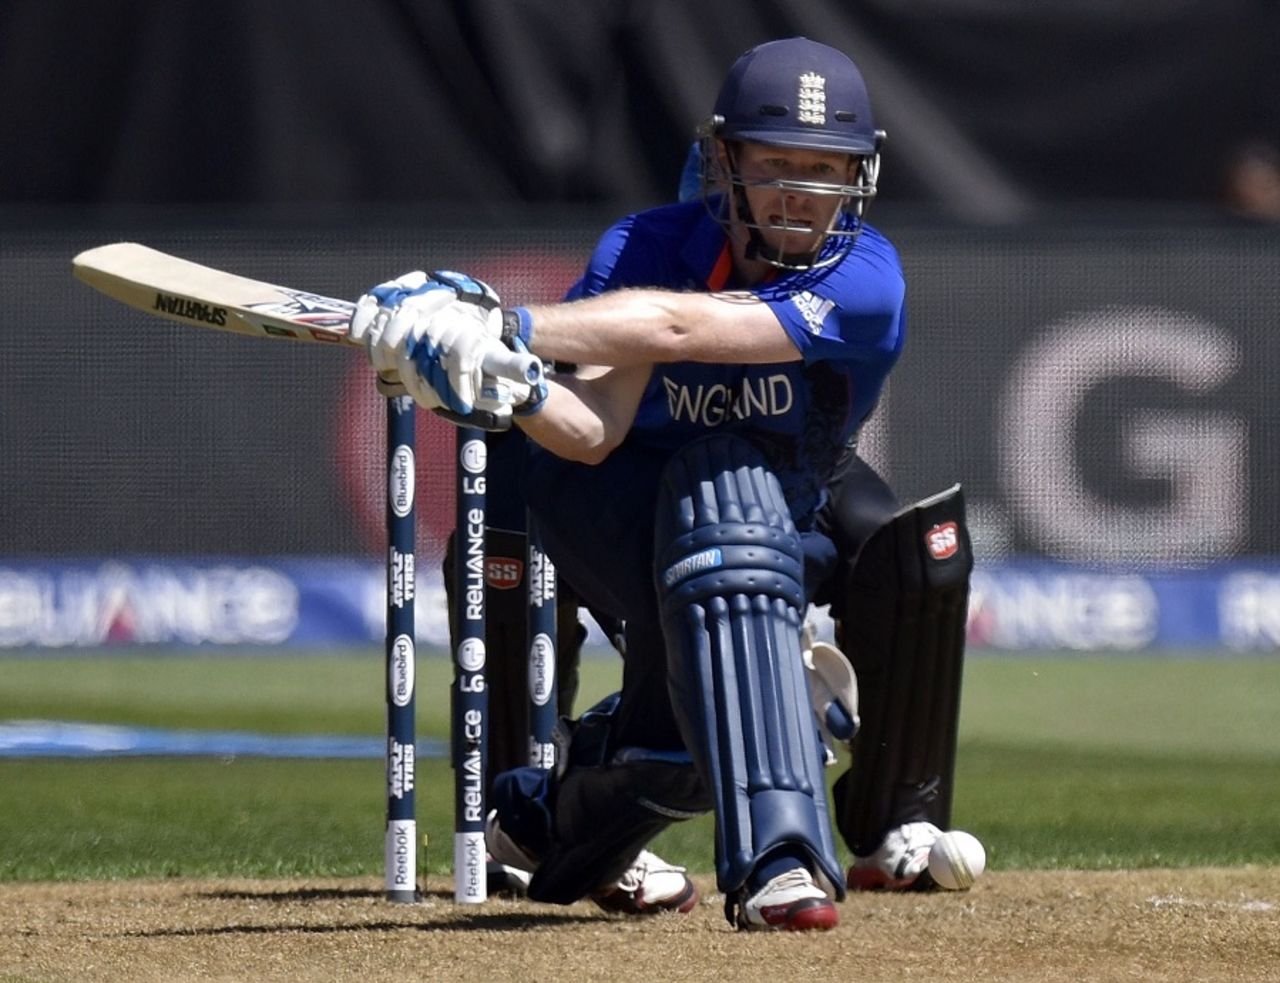 The reverse sweep was on show during Eoin Morgan's innings, New Zealand v England, World Cup 2015, Group A, Wellington, February 20, 2015